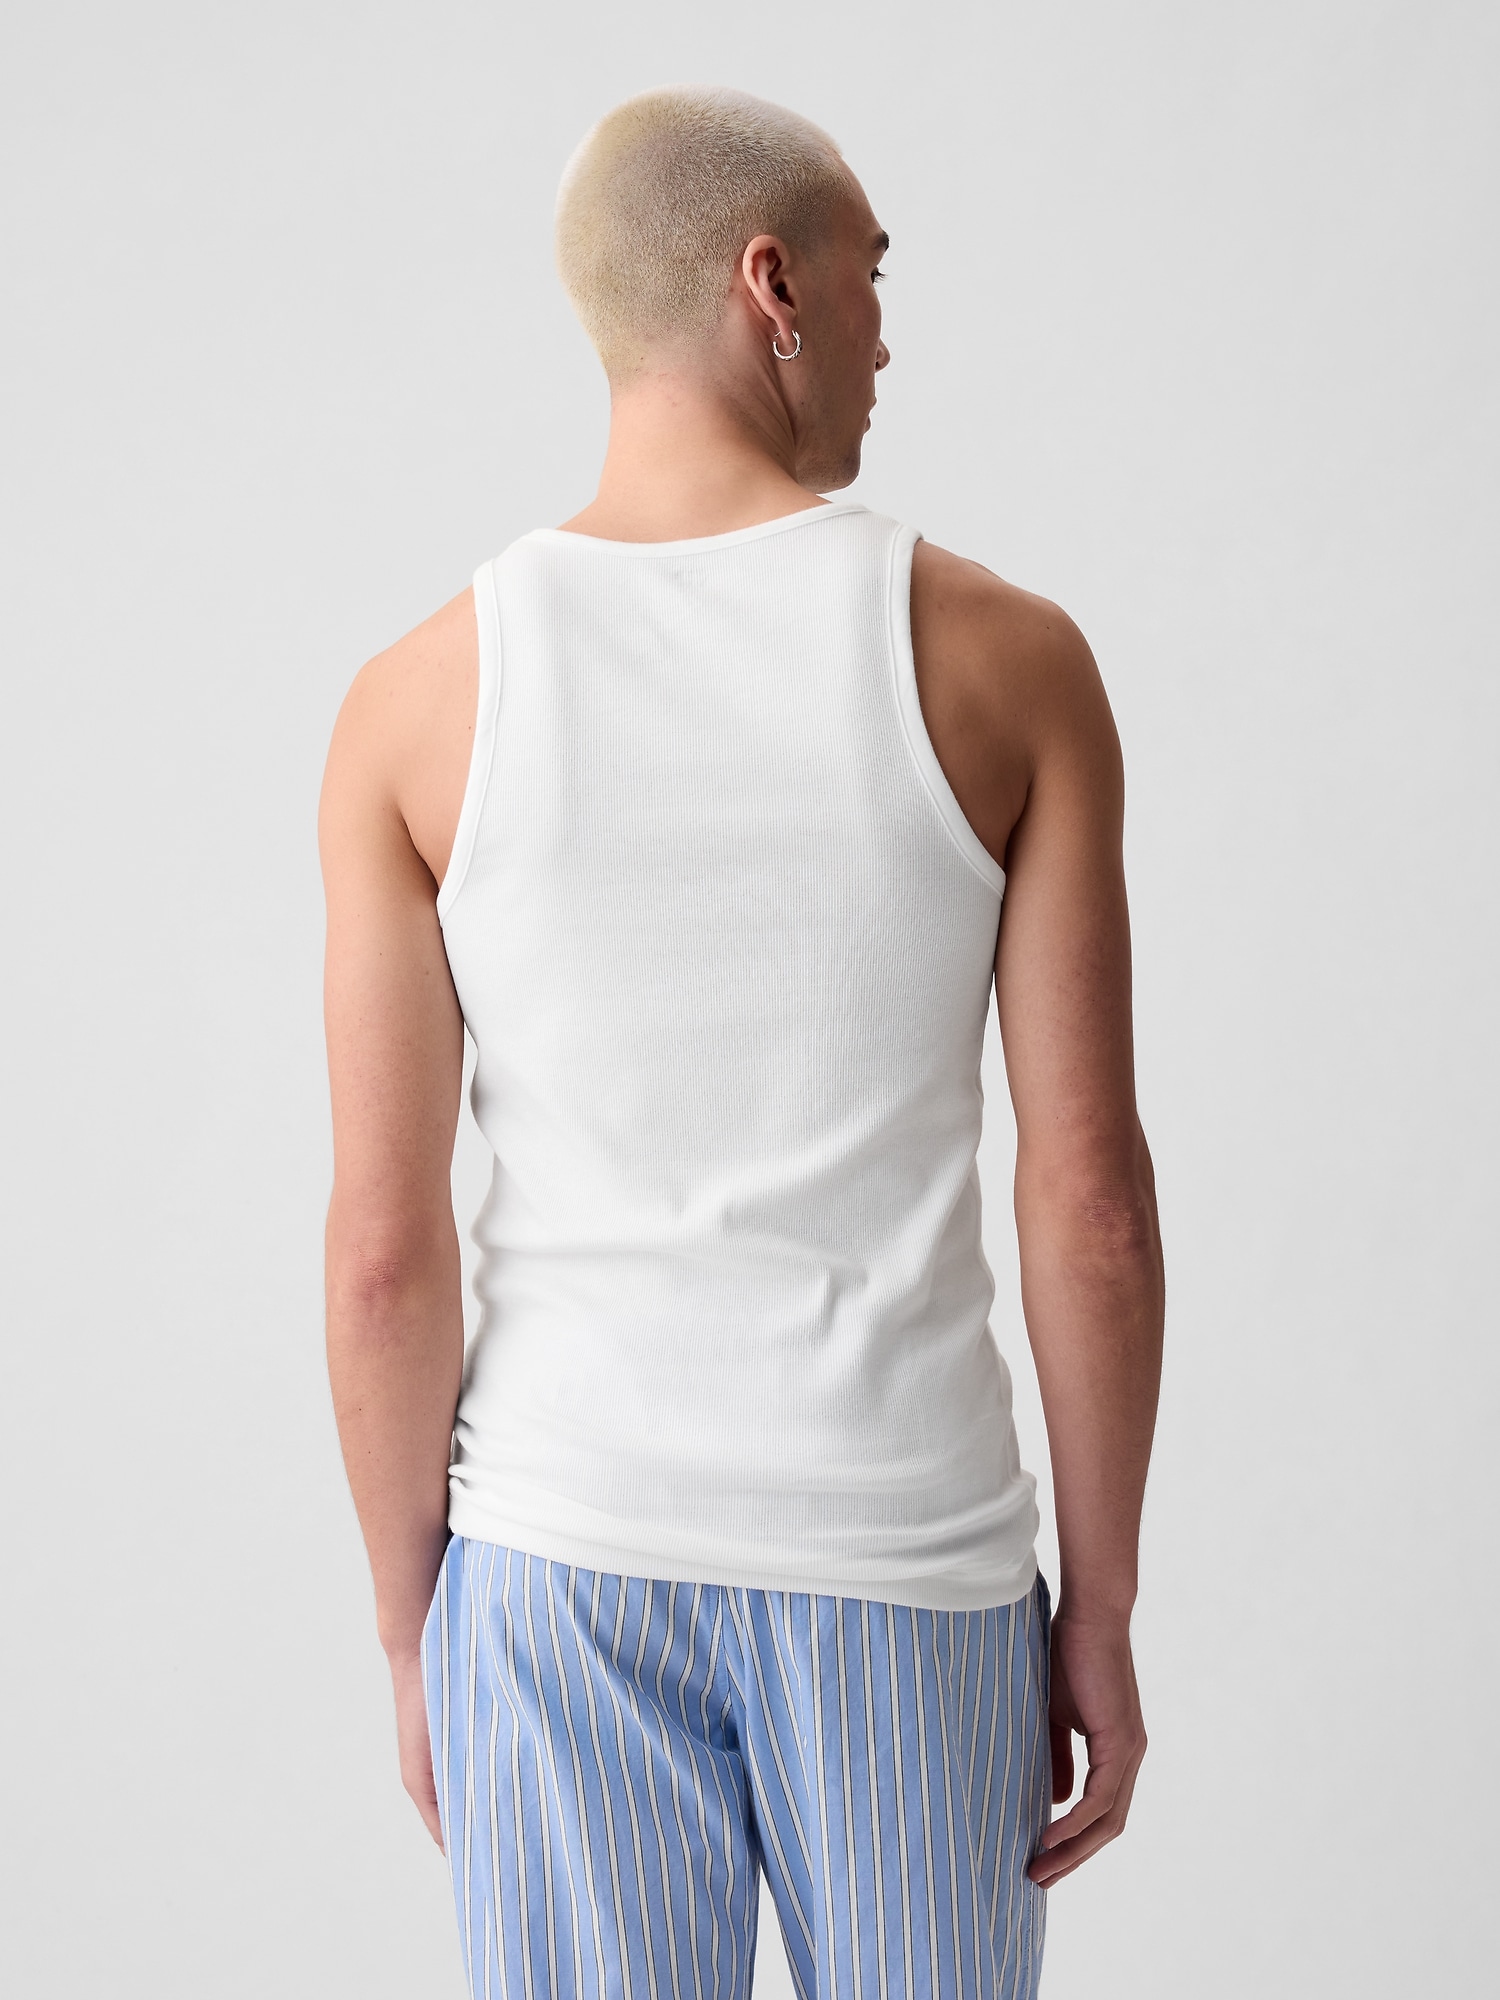 Long Days Ahead Cami Tank - Off White